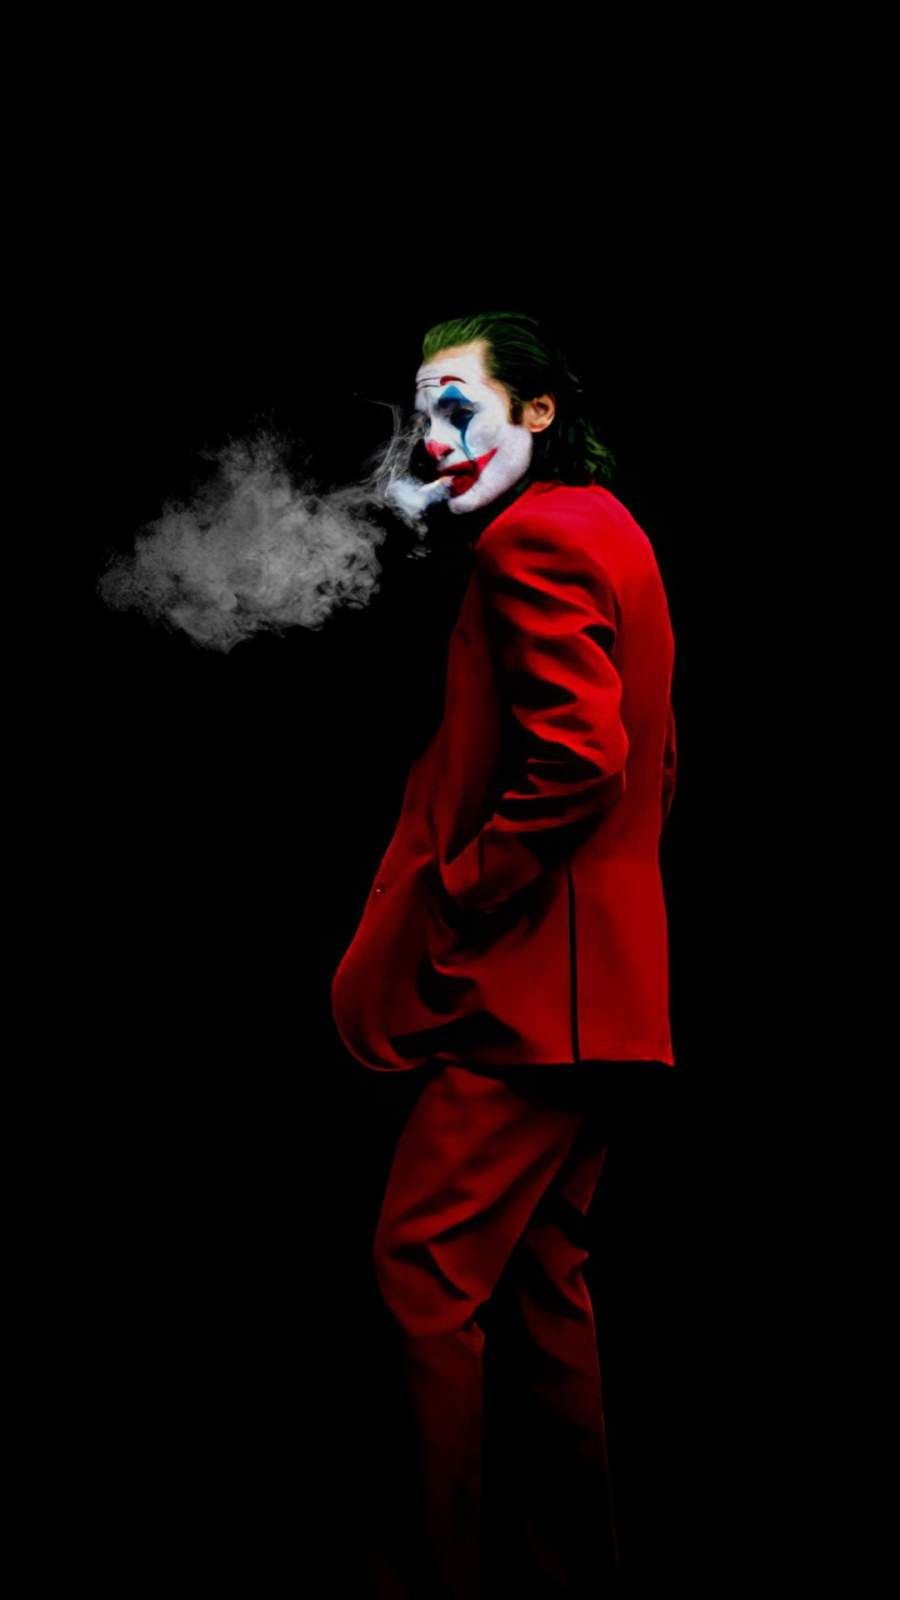 Download Joker Wallpaper - Android, iOS & PC